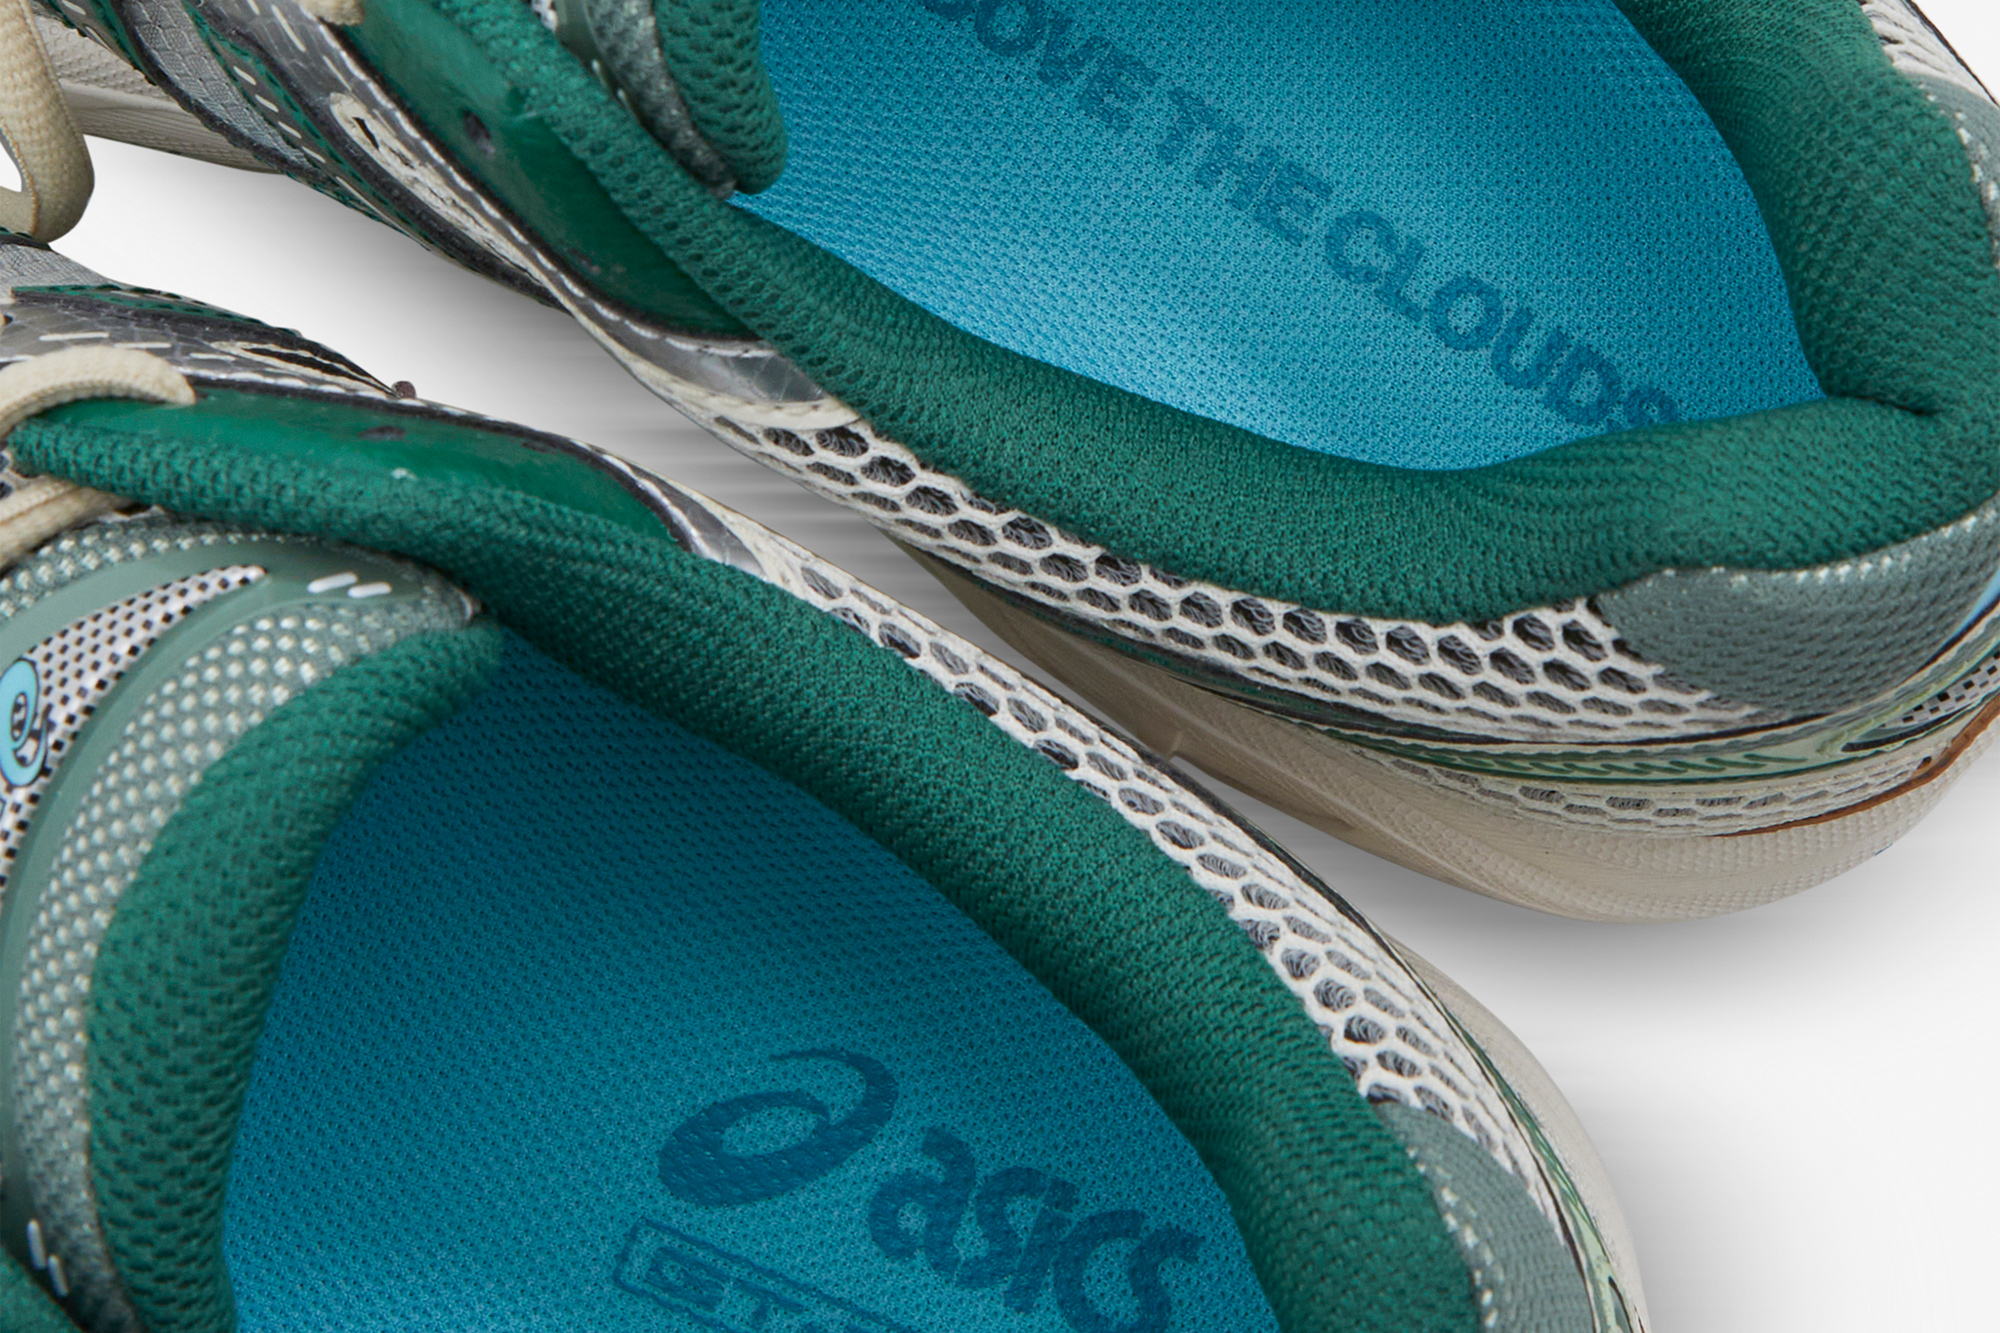 ASICS Australia | ABOVE THE CLOUDS GT-2160™